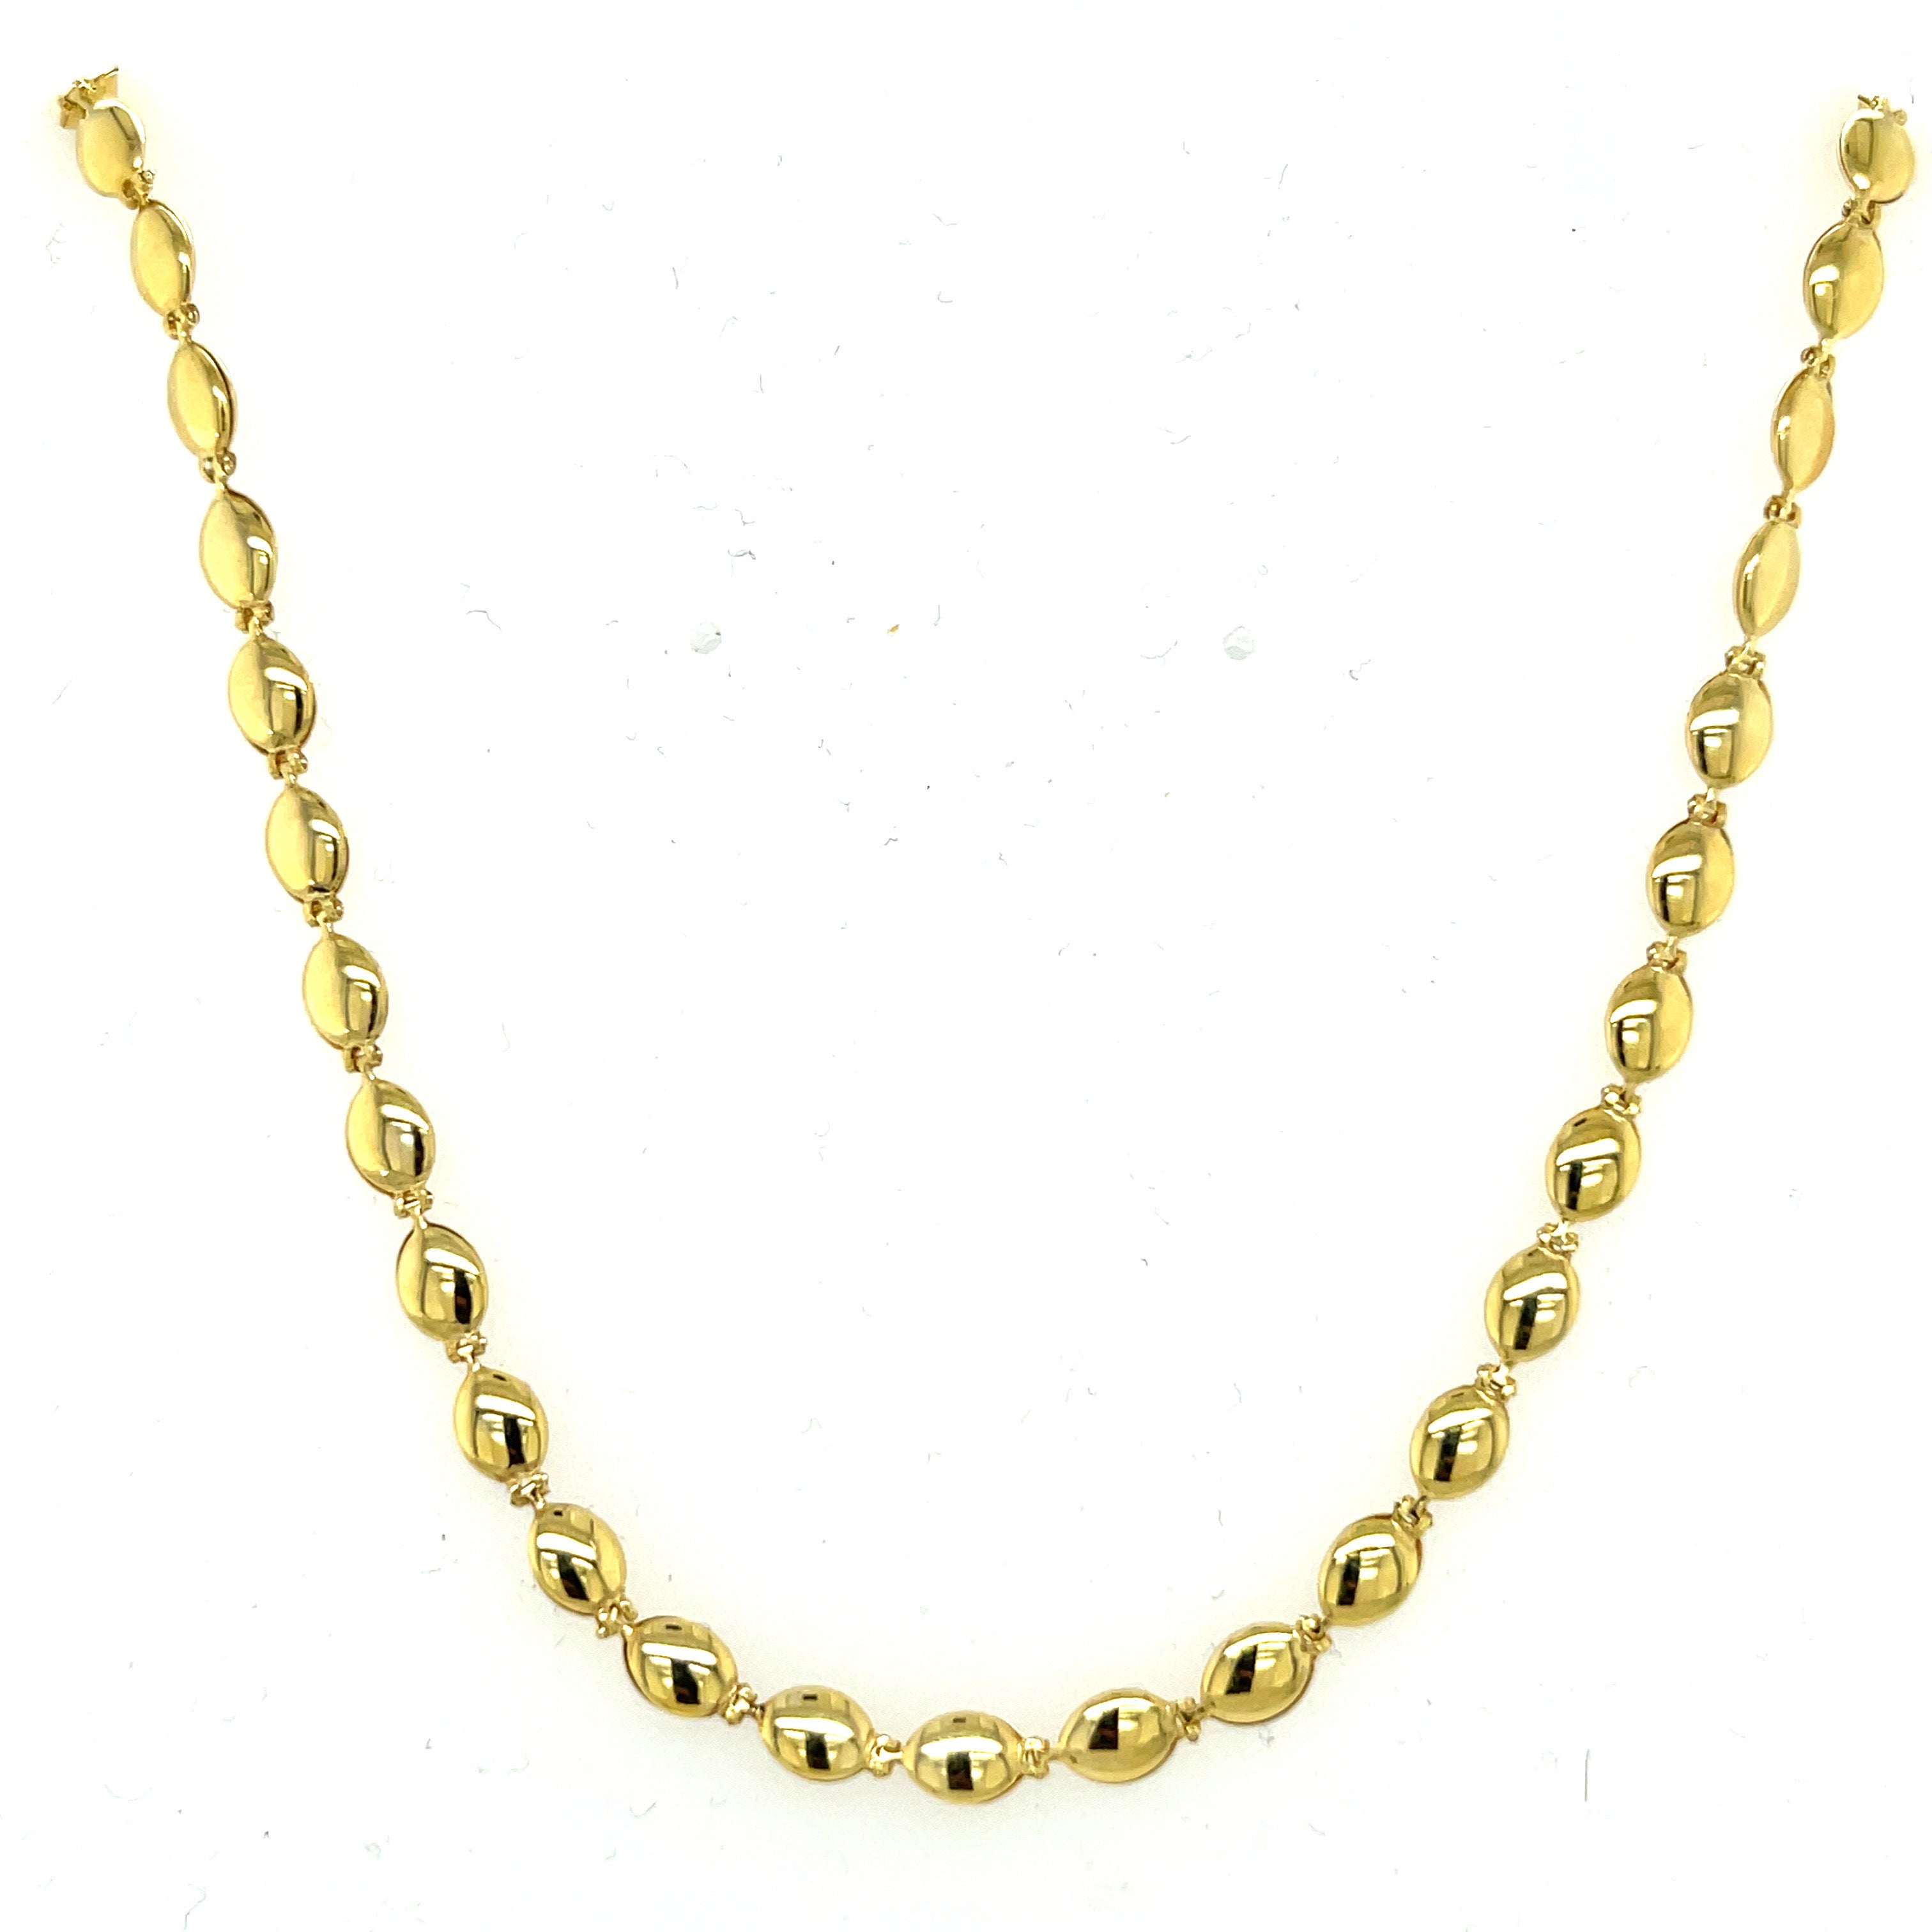 14k Gold Pebble Bead Necklace